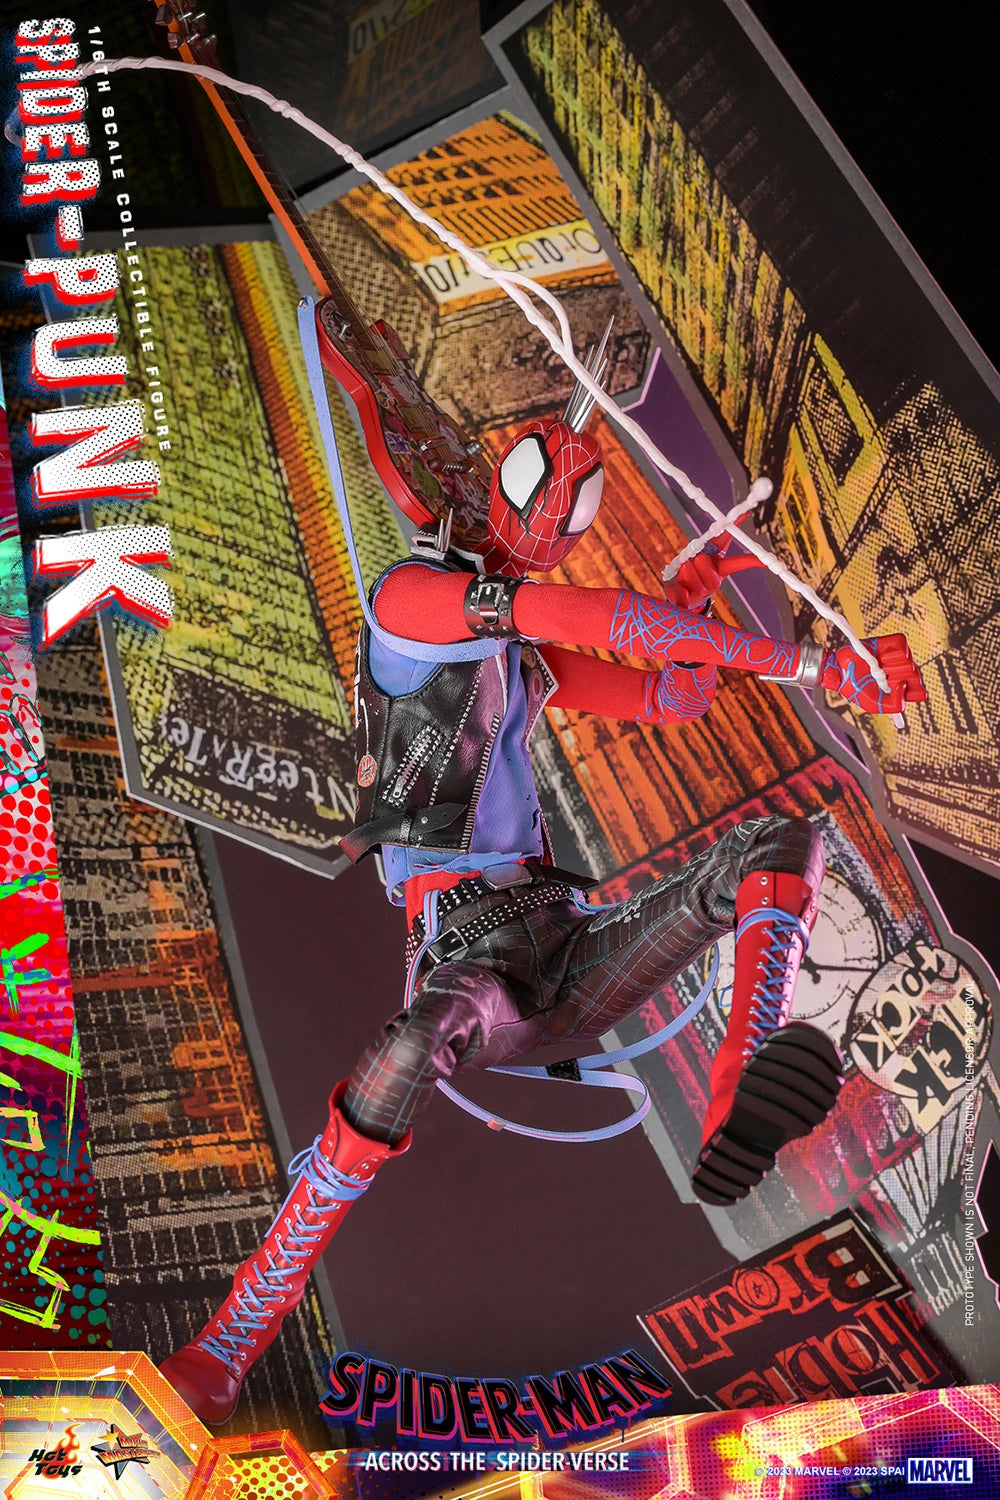 Hot Toys Spider-Man Across The Spider-Verse Spider-Punk 1/6 Scale Figure